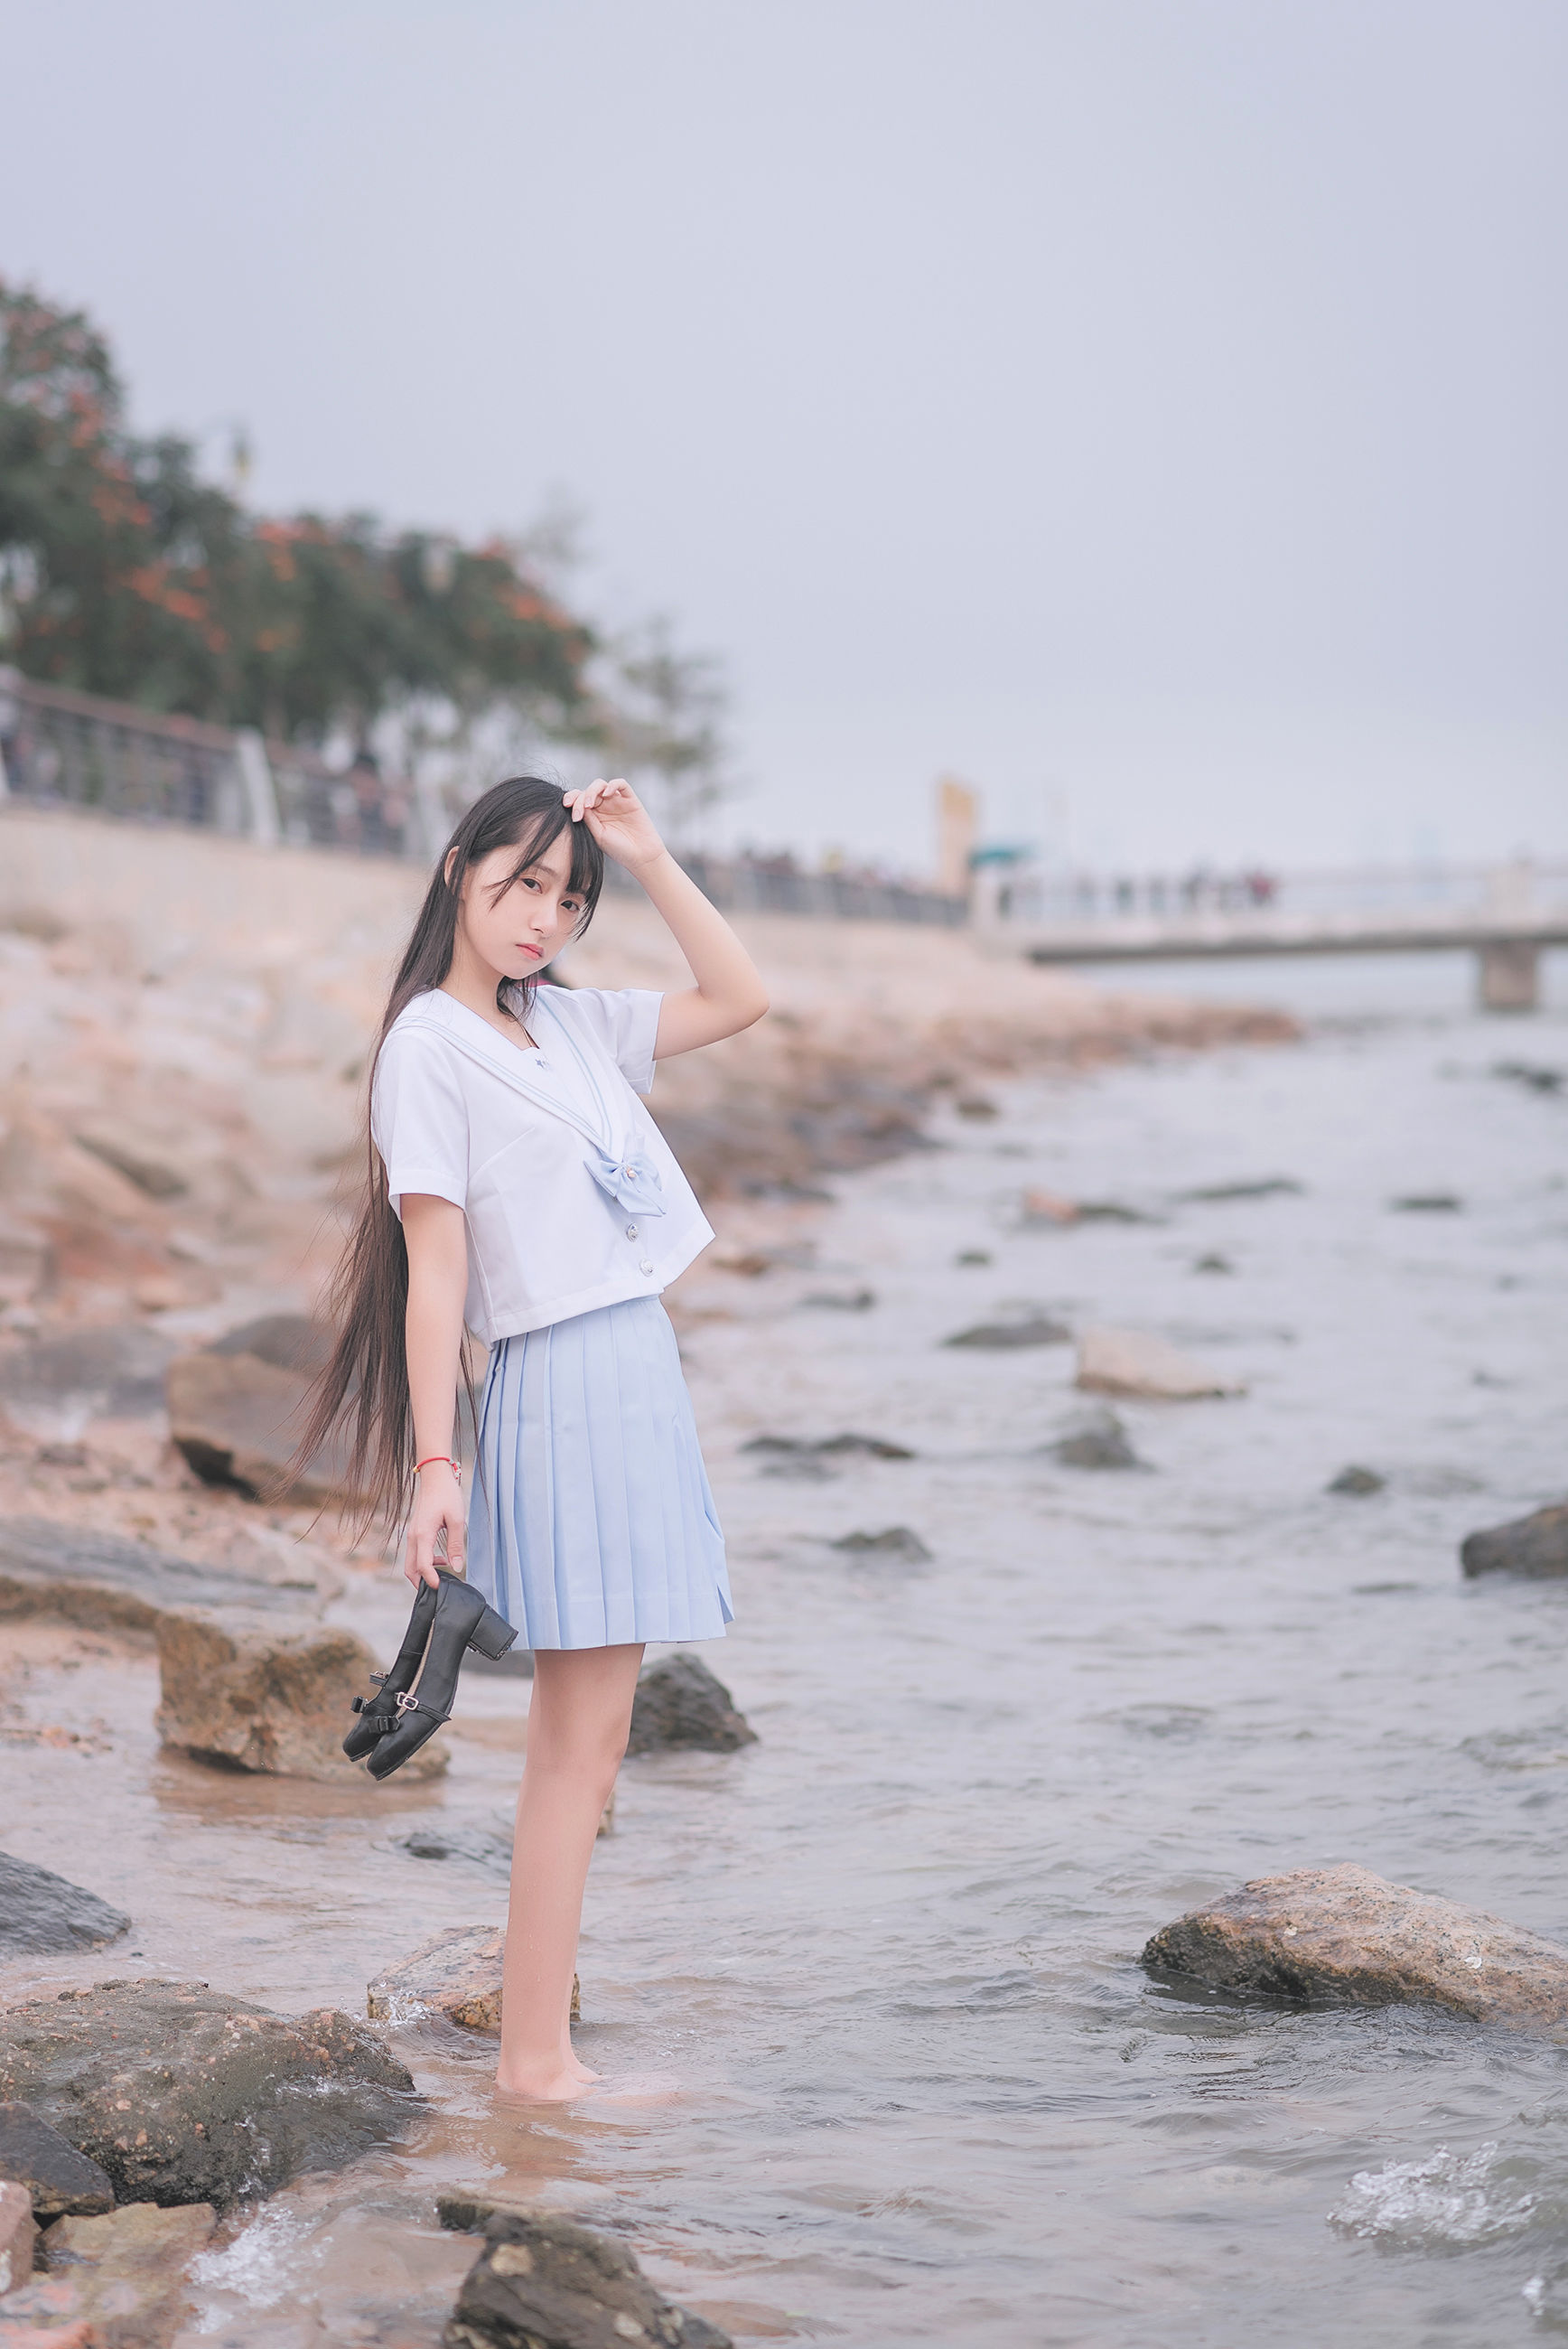 COS Welfare Meng Girl Gama Yu Luo -Go to the Sea together